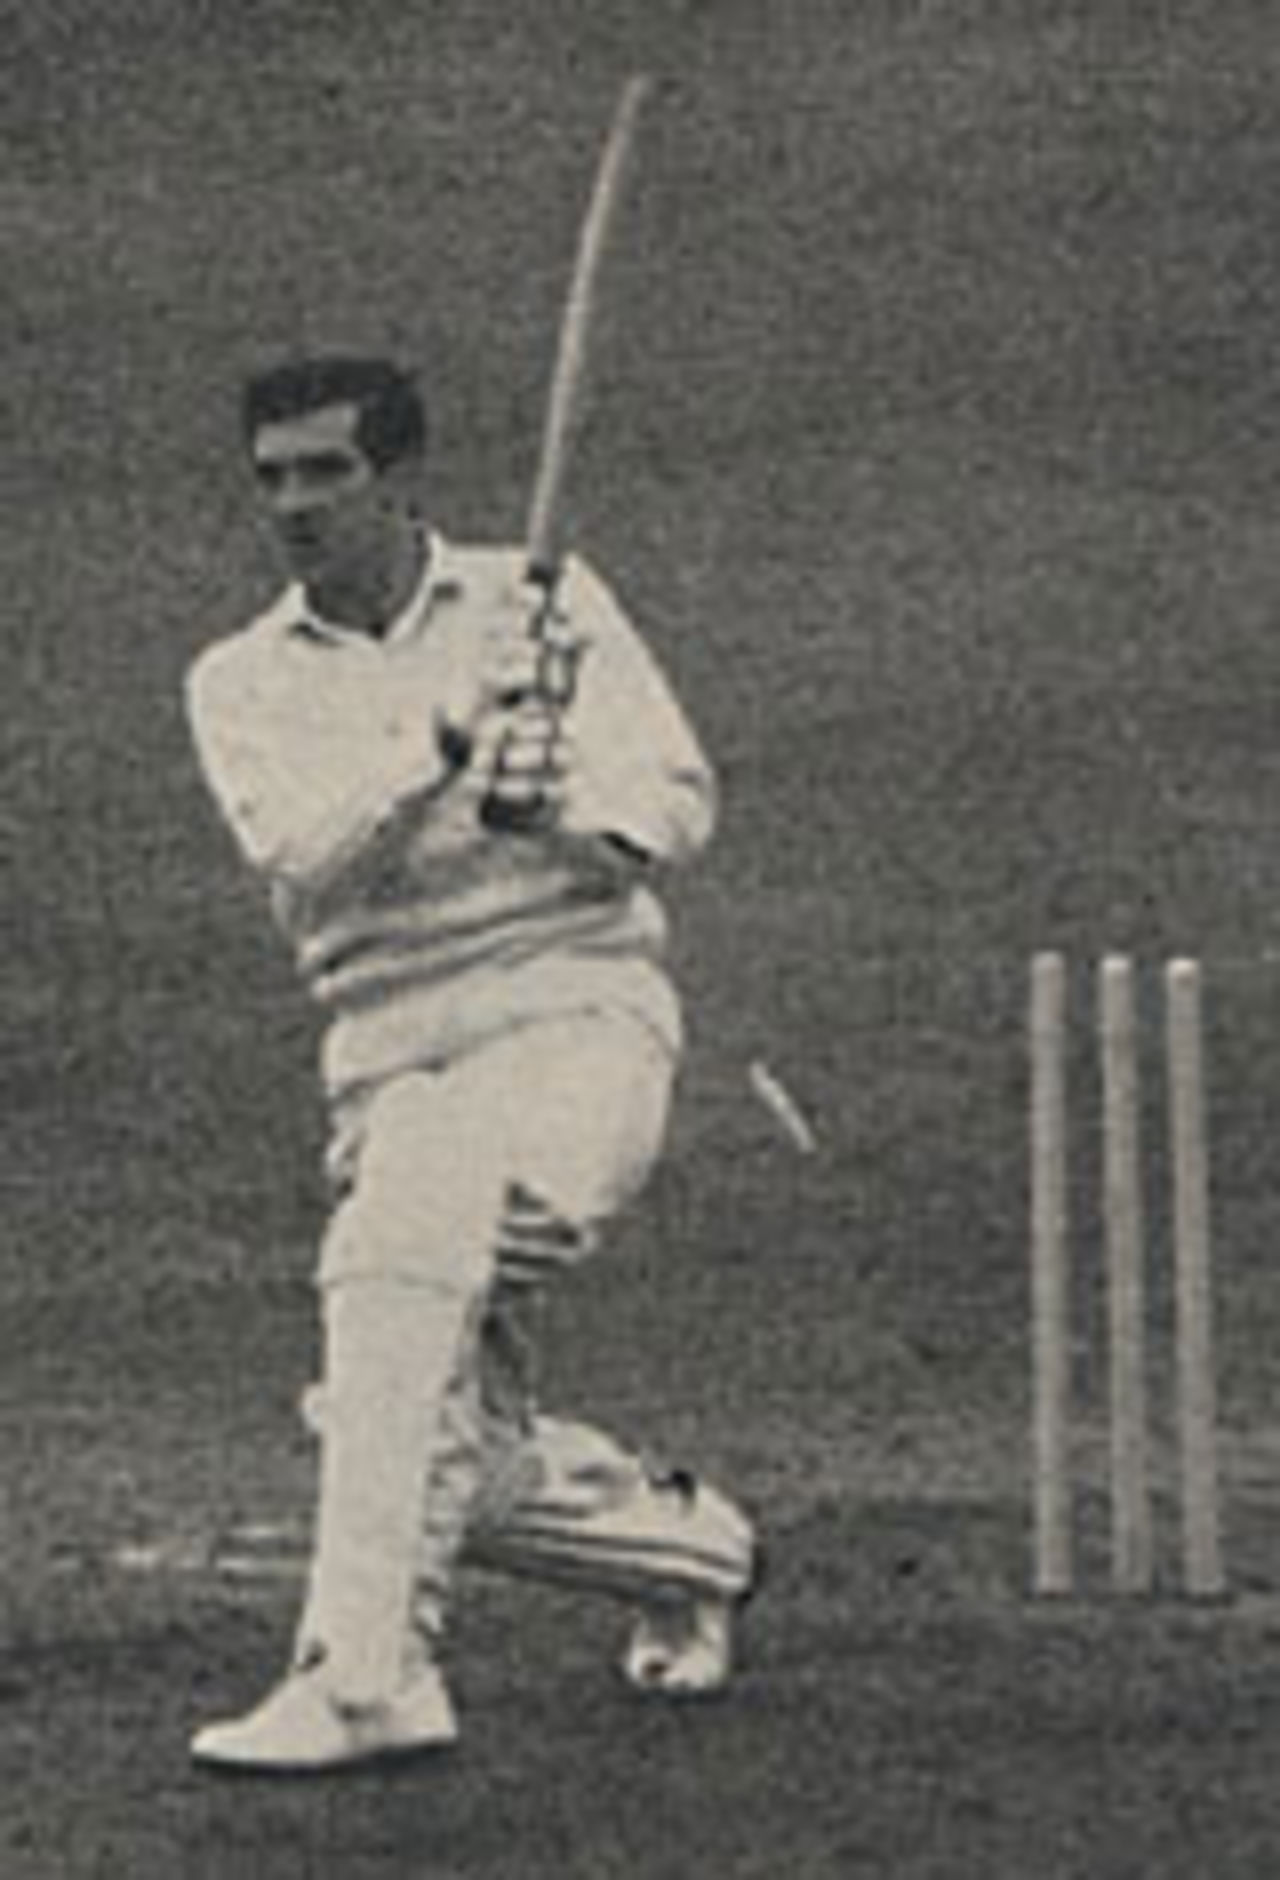 Fred Trueman bowled to give Geoff Griffin his hat-trick, England v South Africa, 2nd Test, Lord's, June 1960